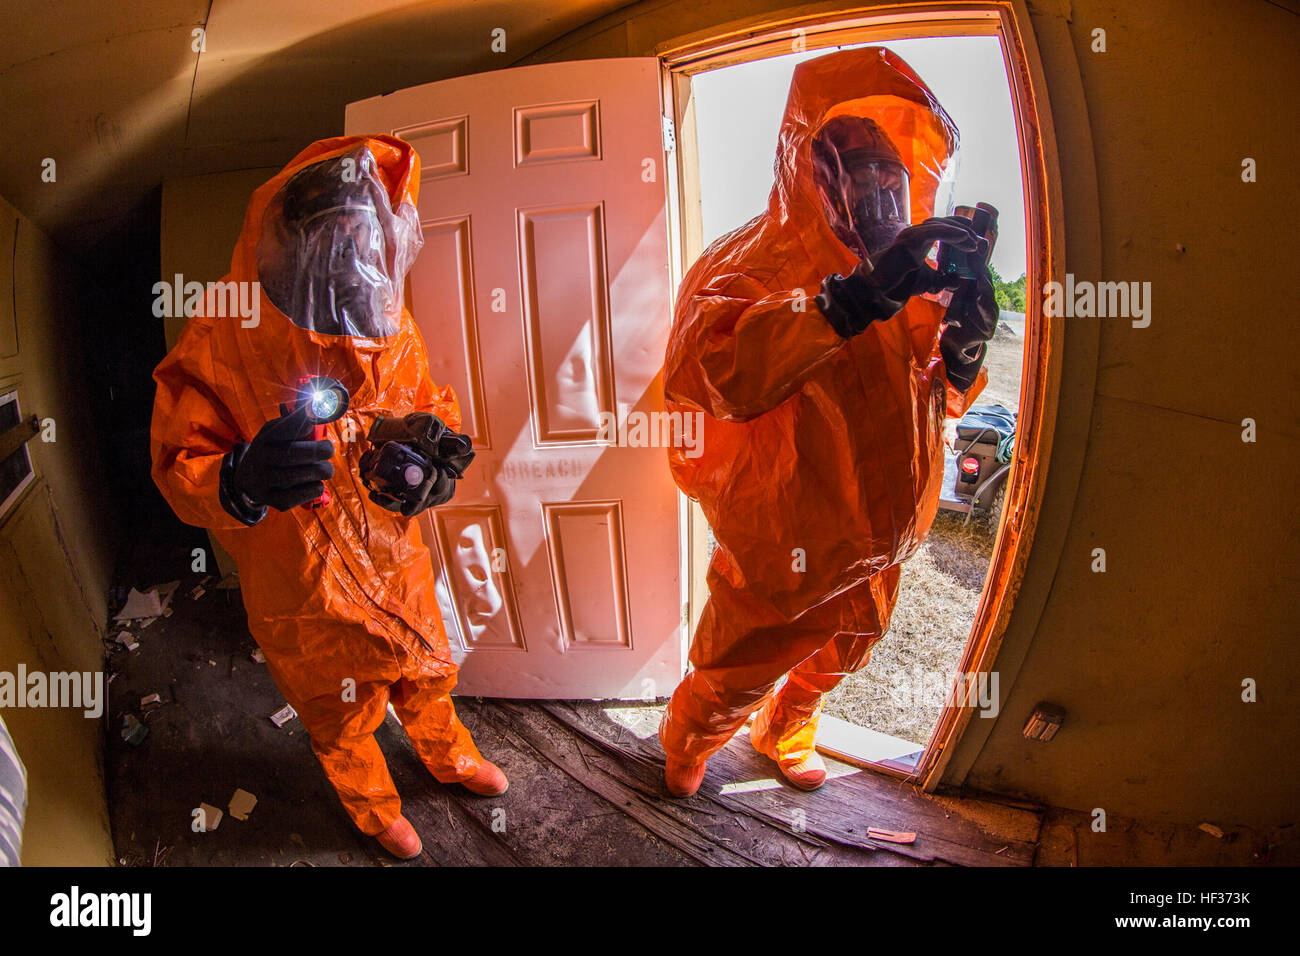 Strike Team members with the 21st Weapons of Mass Destruction Civil Support Team (WMD CST), New Jersey National Guard investigate a suspicious site during a full-scale Homeland Response Force exercise involving units from the New Jersey and New York Army and Air National Guard at Joint Base McGuire-Dix-Lakehurst, N.J., April 16, 2015. The Chemical, Biological, Radiological and Nuclear (CBRN) portion of the exercise was performed by National Guard Soldiers and Airmen from New Jersey’s 21st Weapons of Mass Destruction Civil Support Team and New York’s 2nd Weapons of Mass Destruction Civil Suppor Stock Photo